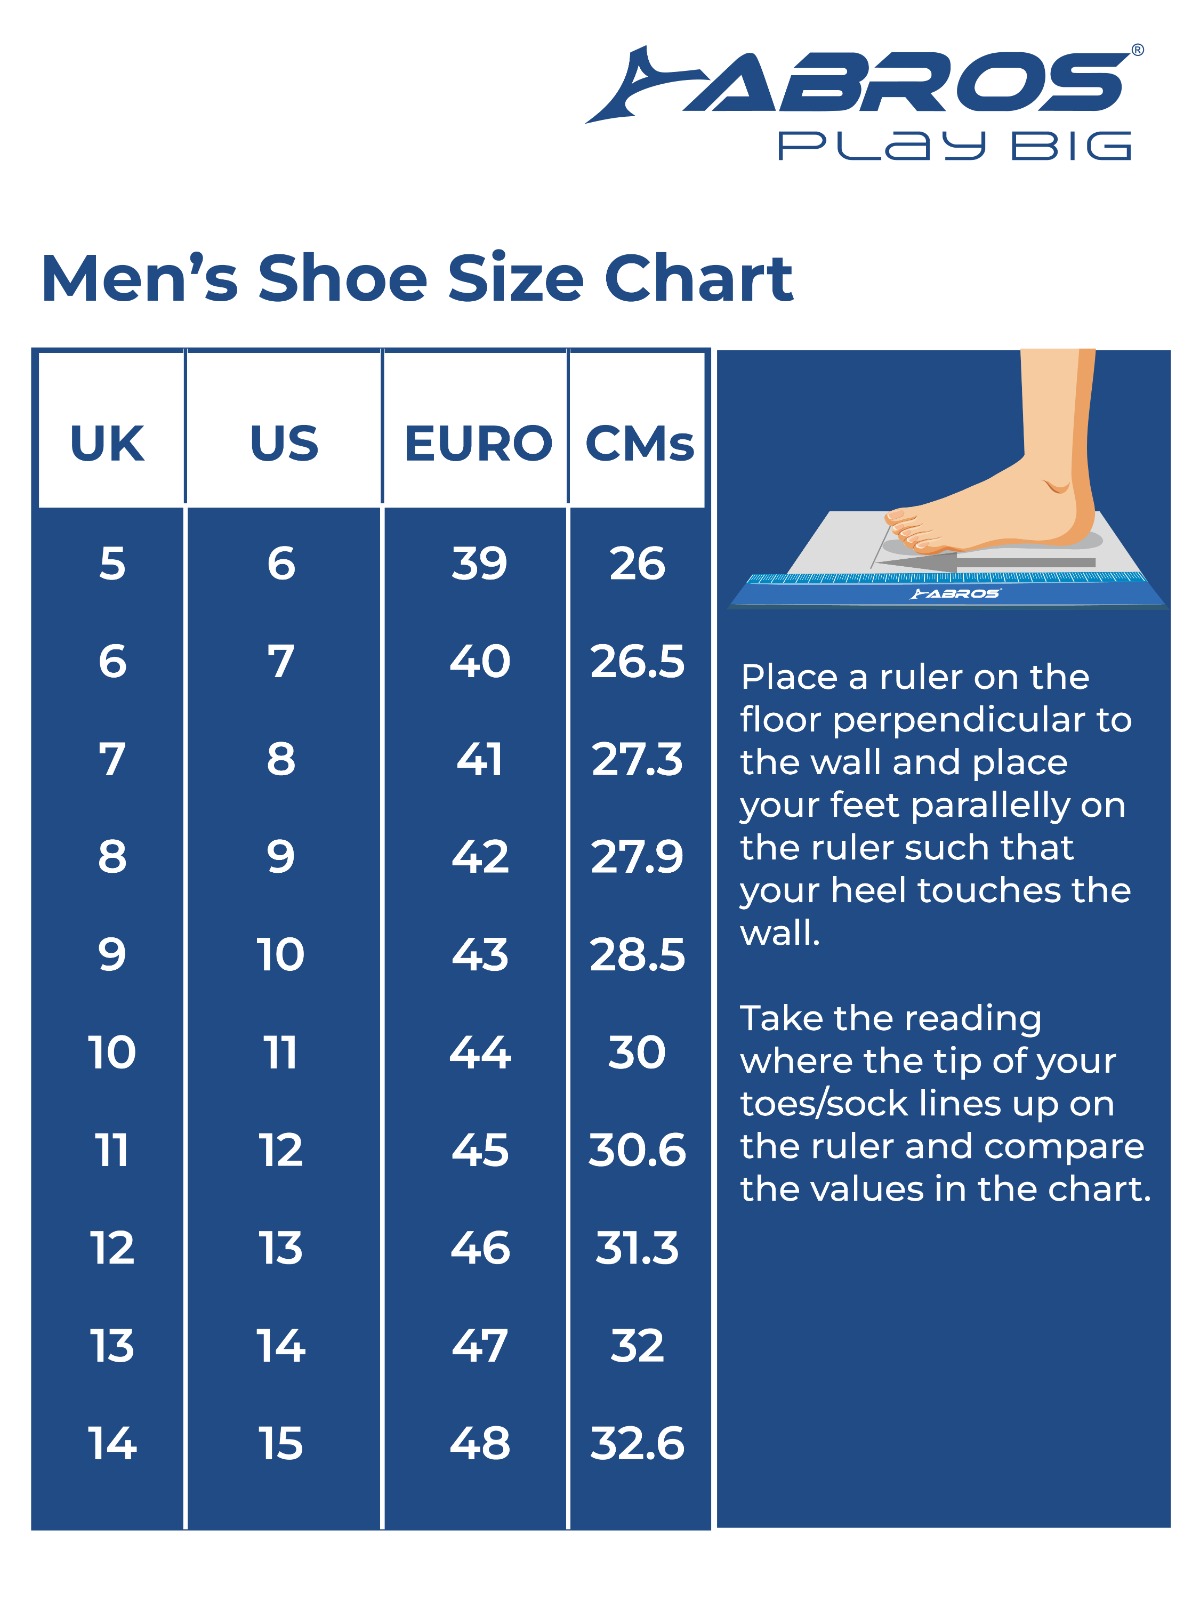 Miracle Sports Shoes For Men